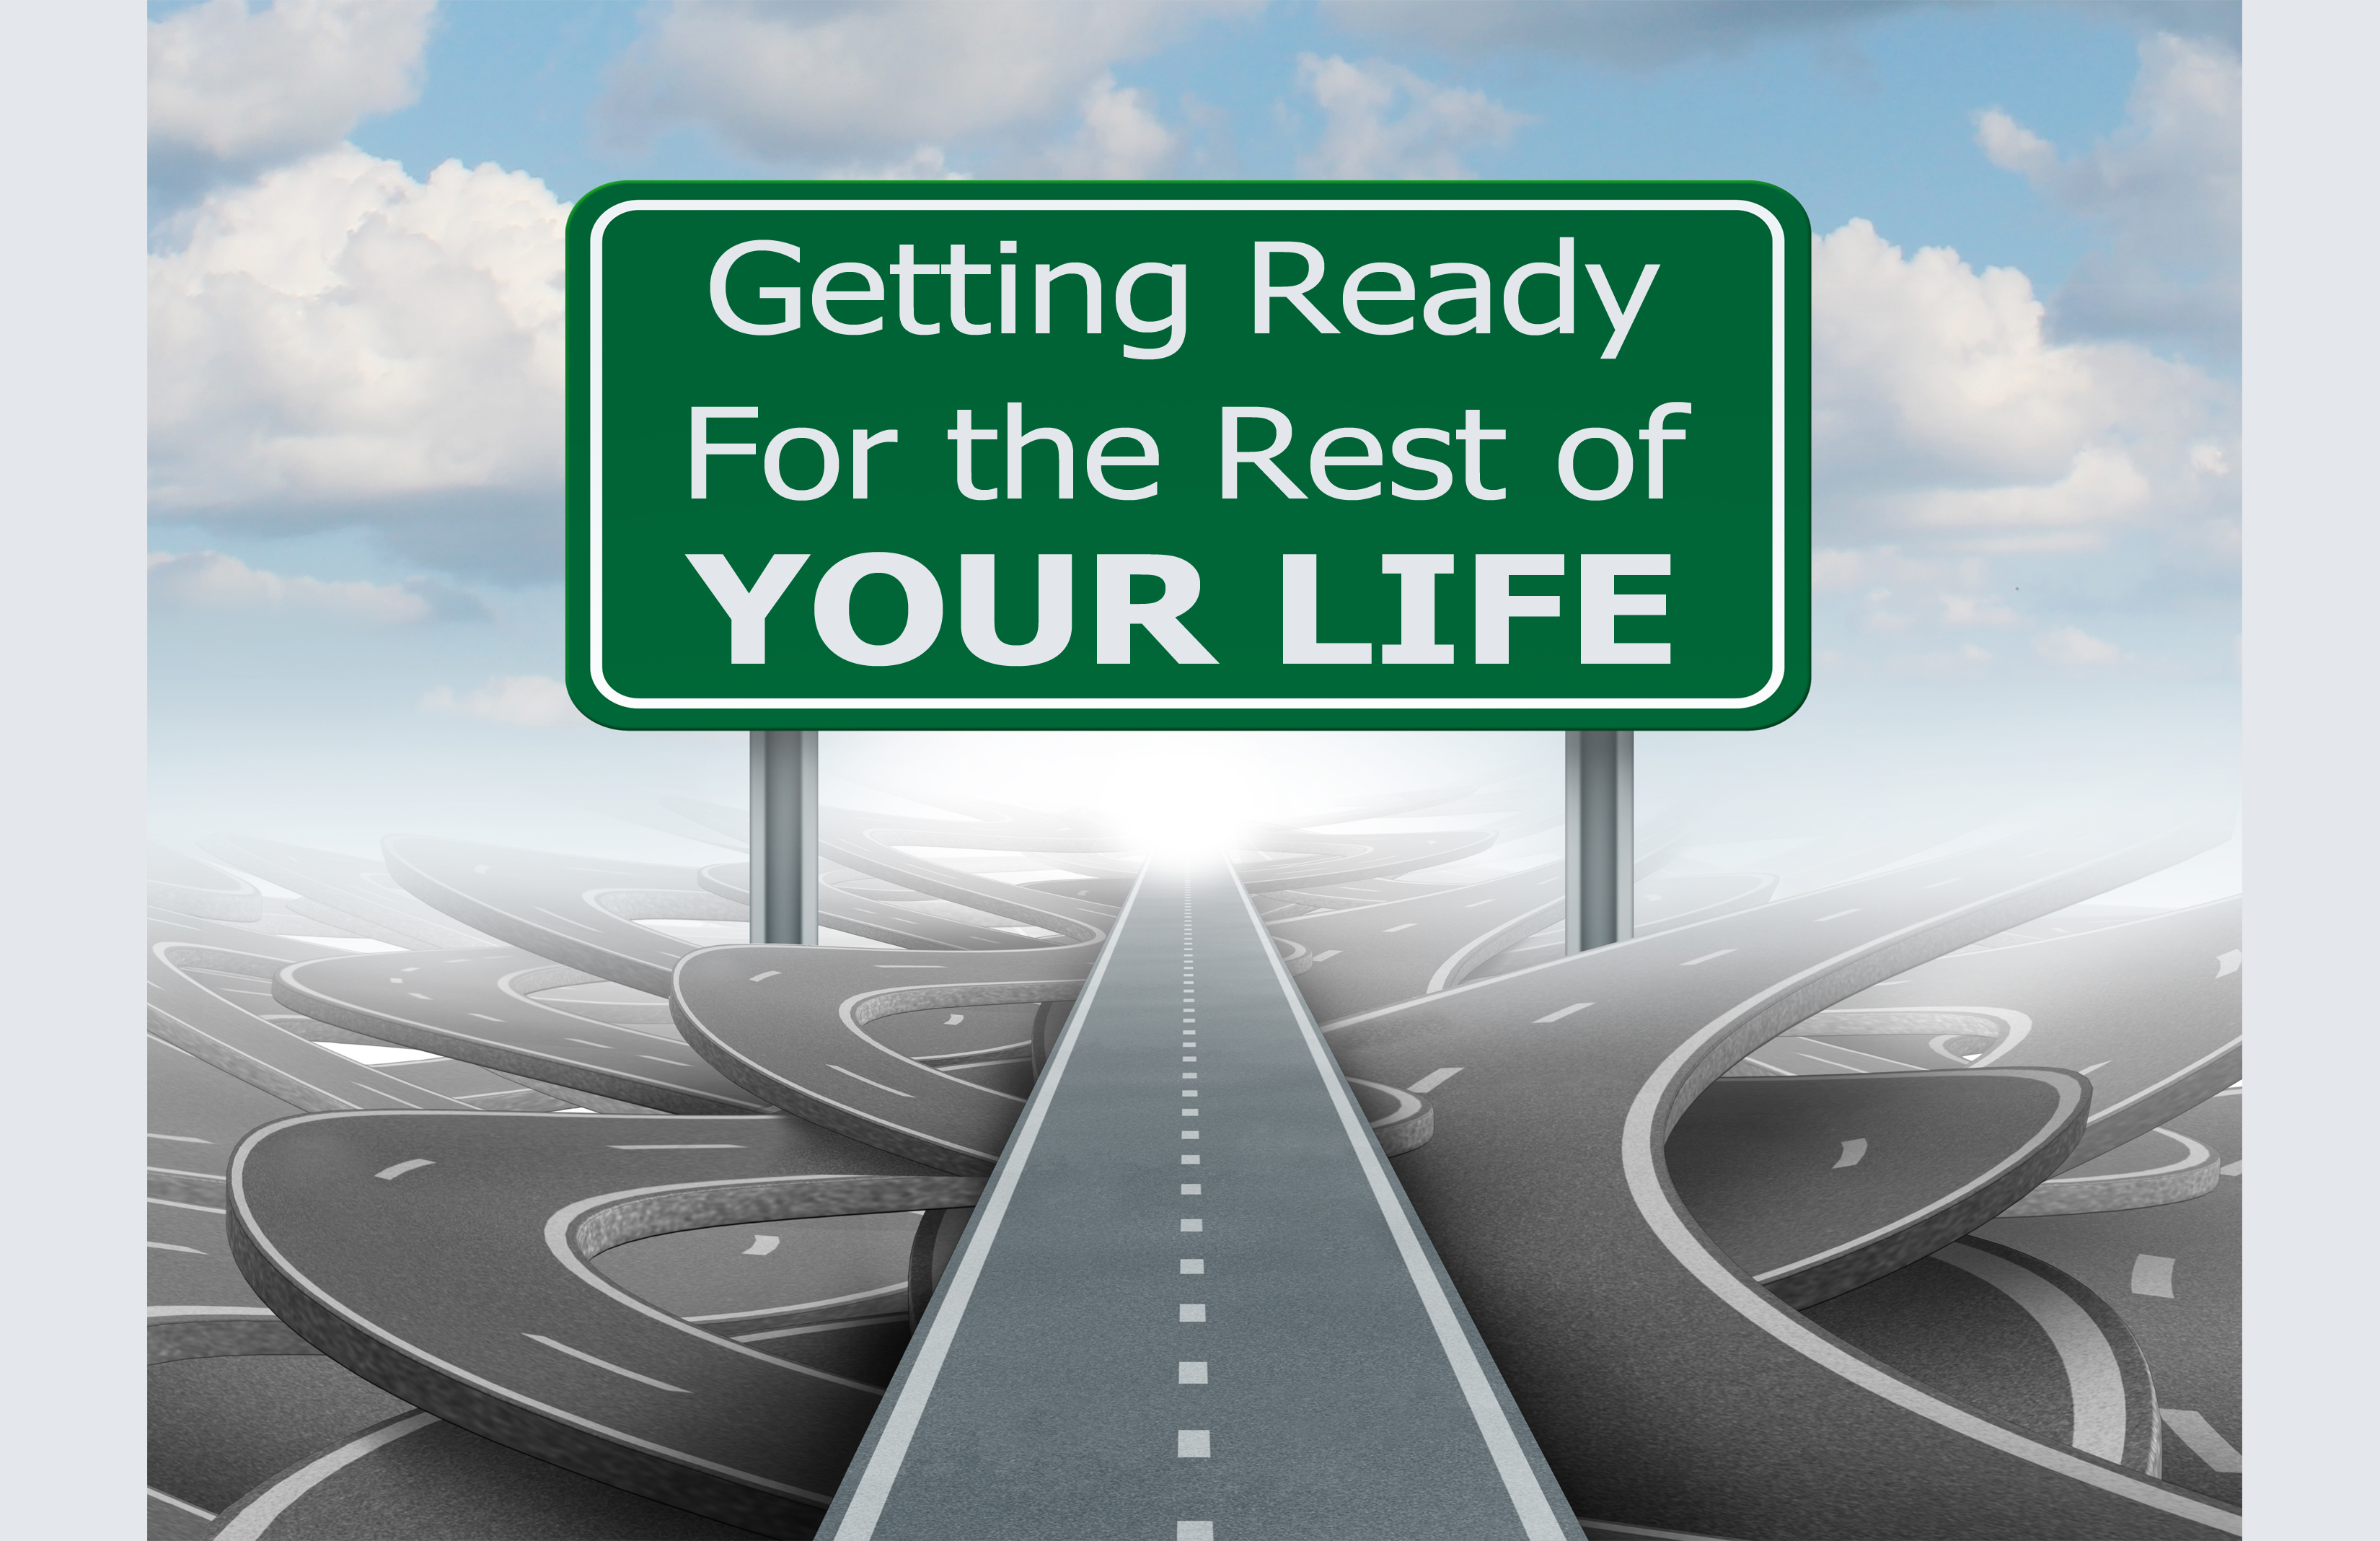 01-19-14 Getting Ready for the Rest of Your Life - Part 3 - The Way To Start A Wise Life